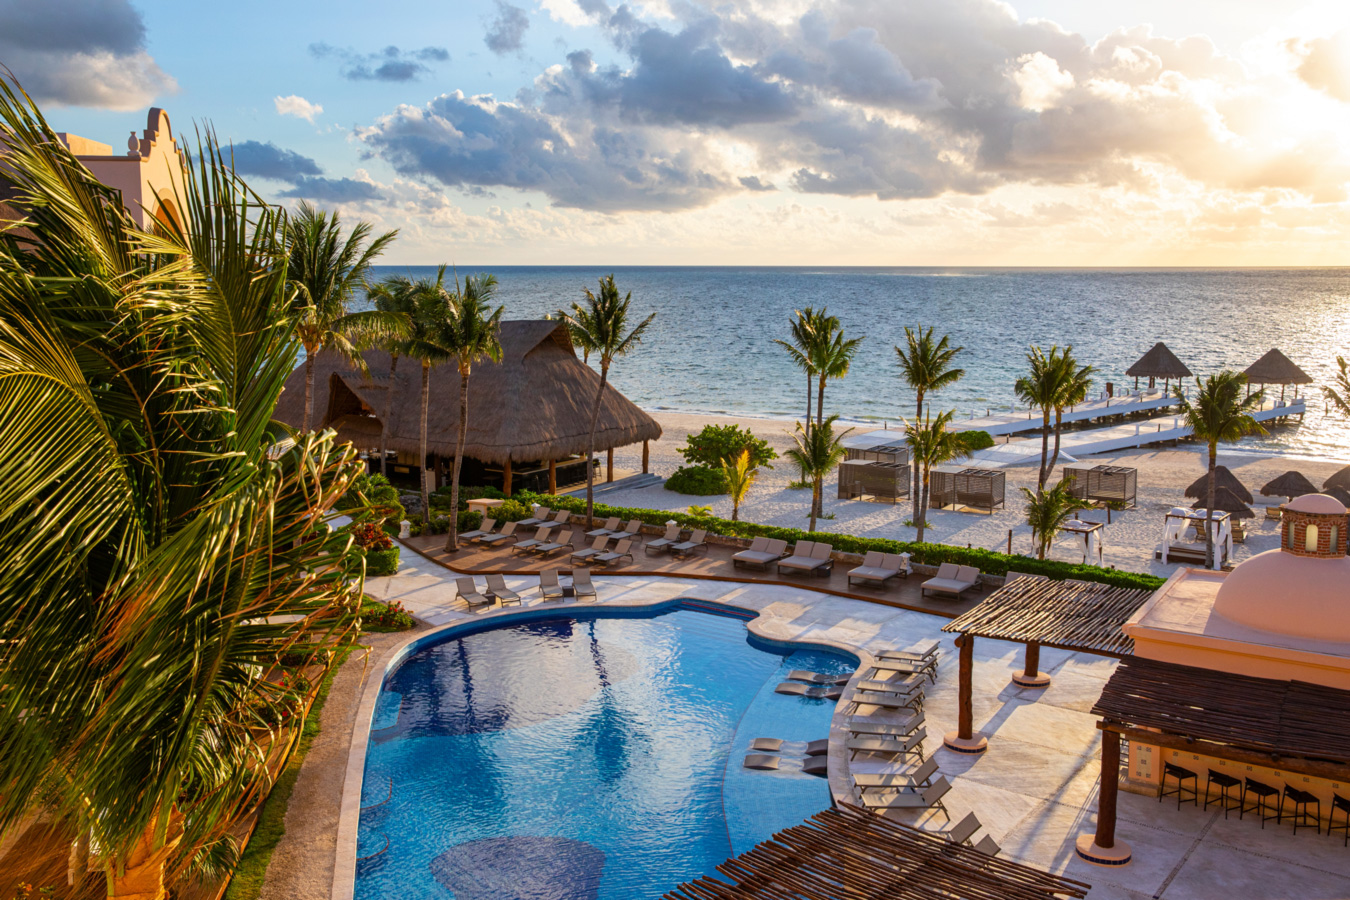 The best place to visit in Mexico: Excellence Riviera Cancun